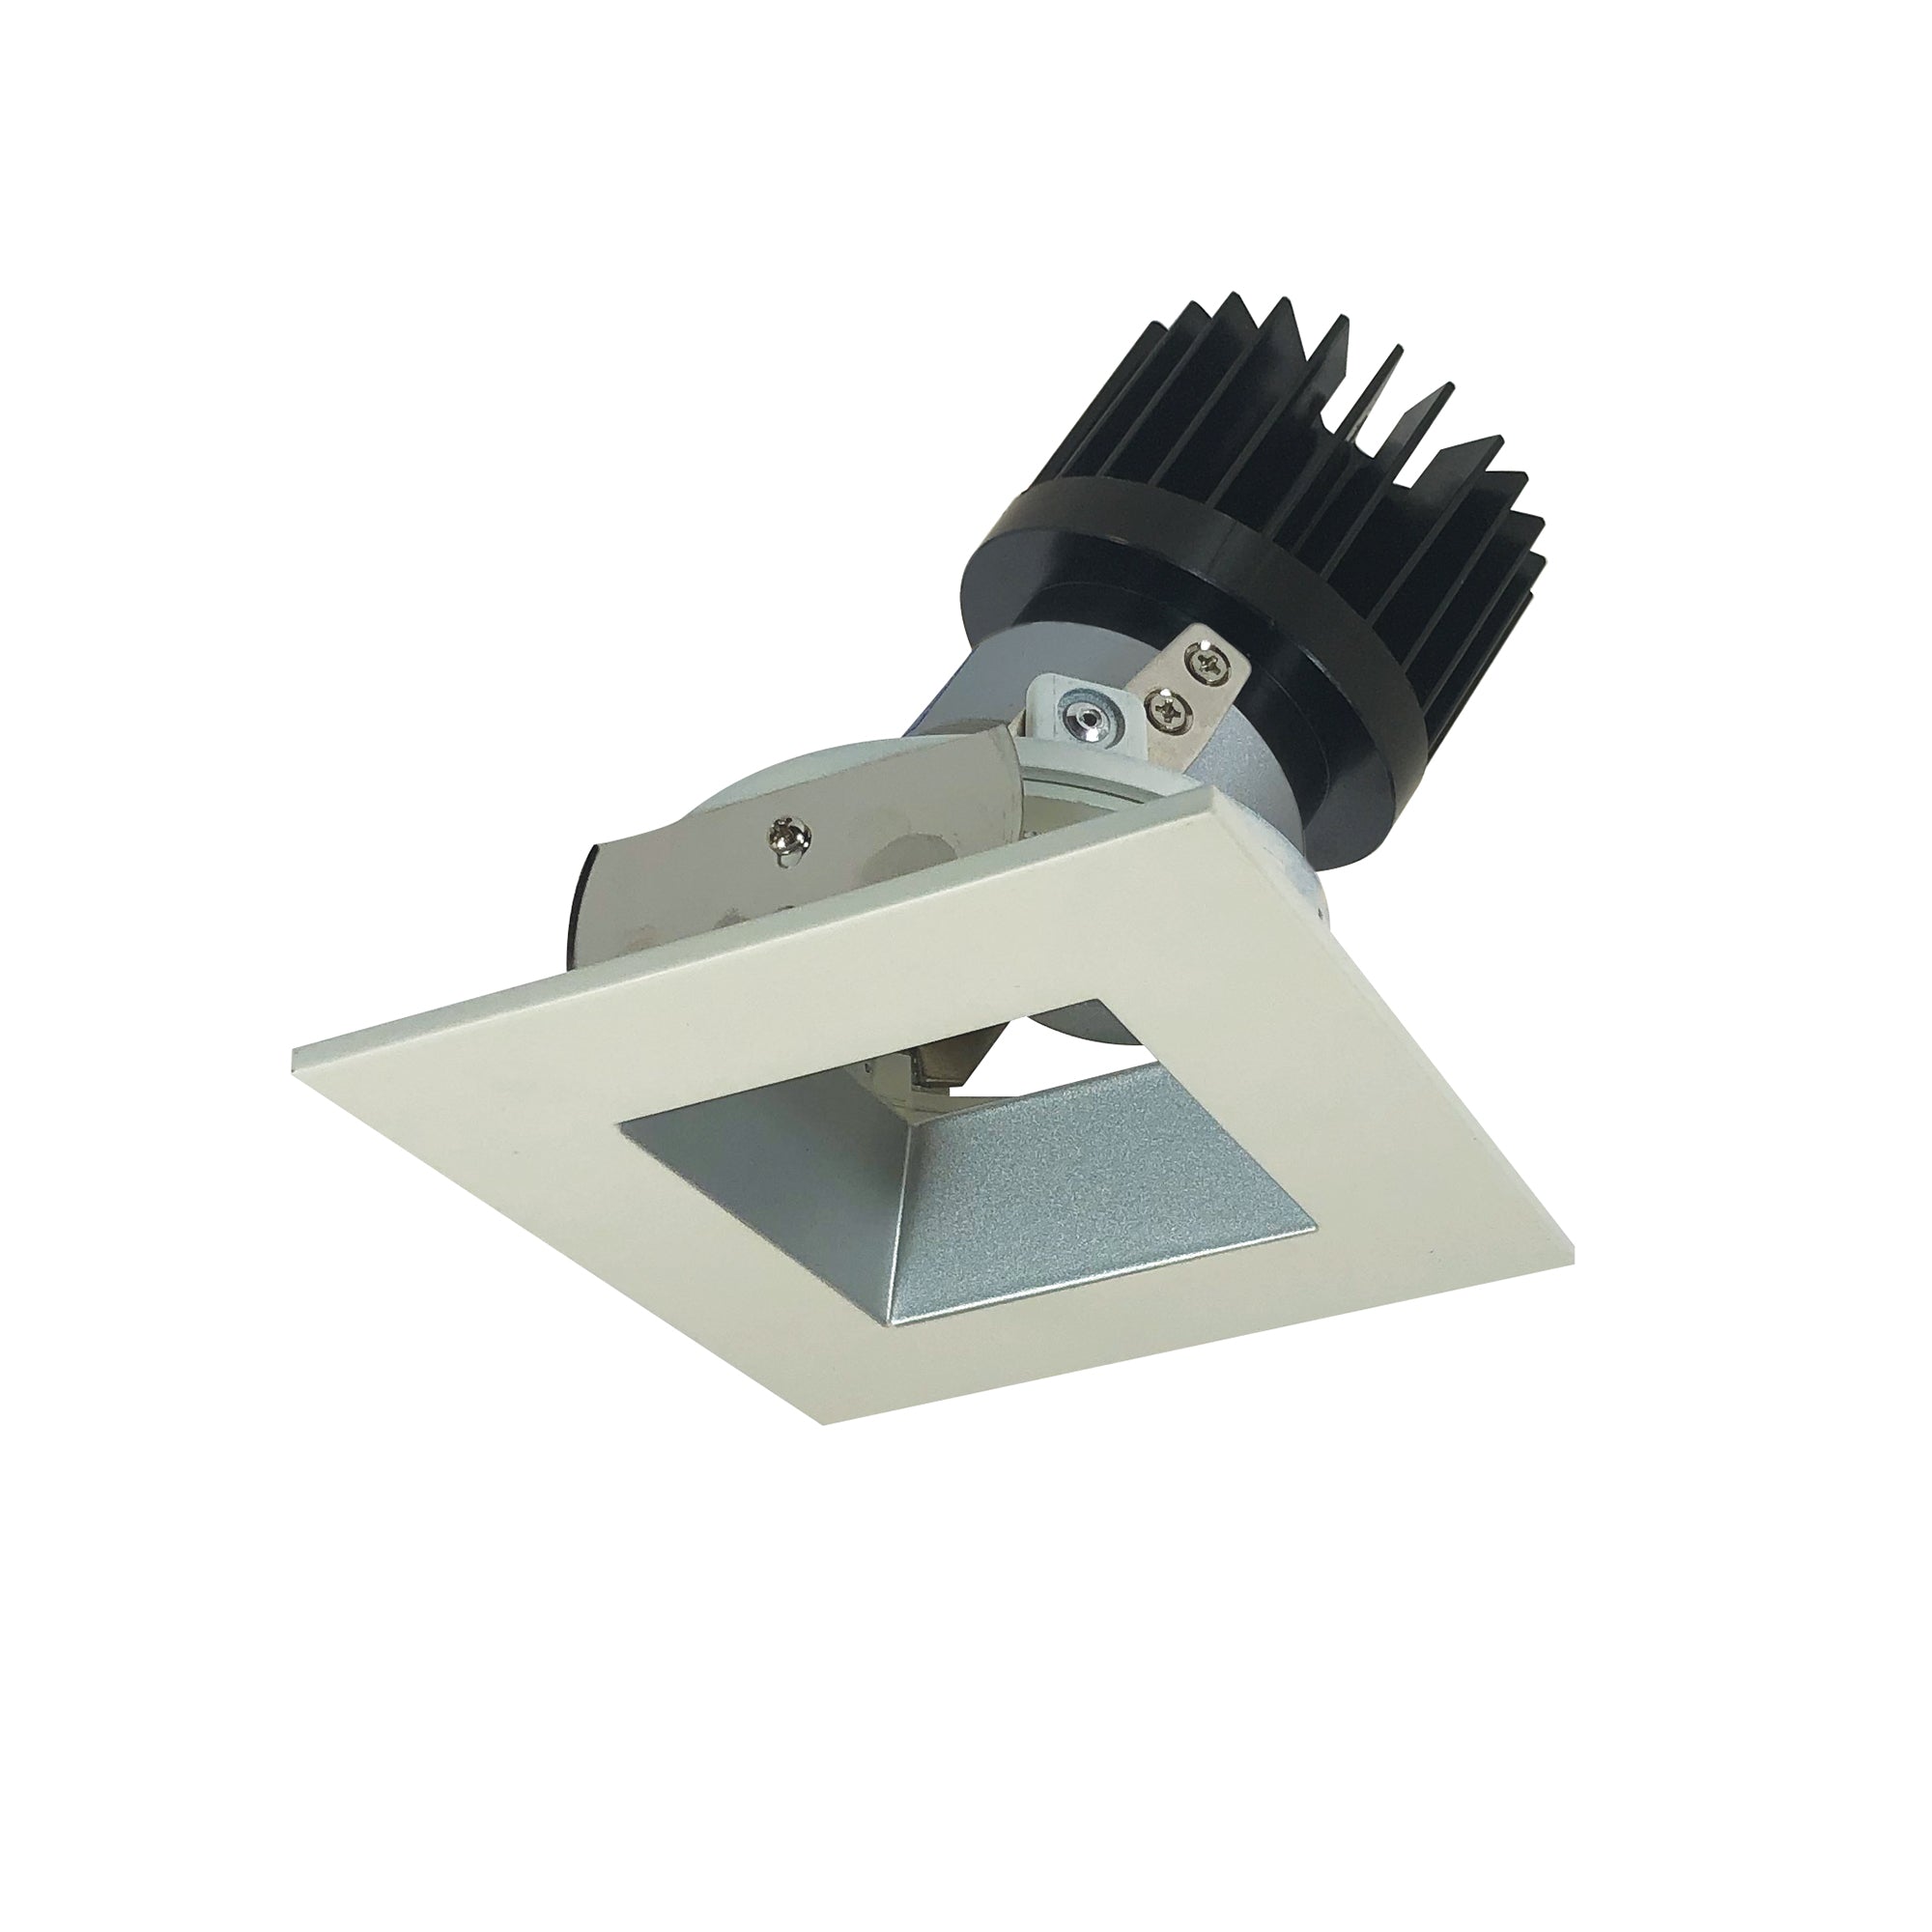 Nora Lighting NIO-4SDSQ30XHW/HL 4" Iolite LED Square Adjustable Reflector With Square Aperture, 1500lm/2000lm (varies by housing), 3000K - Haze Reflector / White Flange